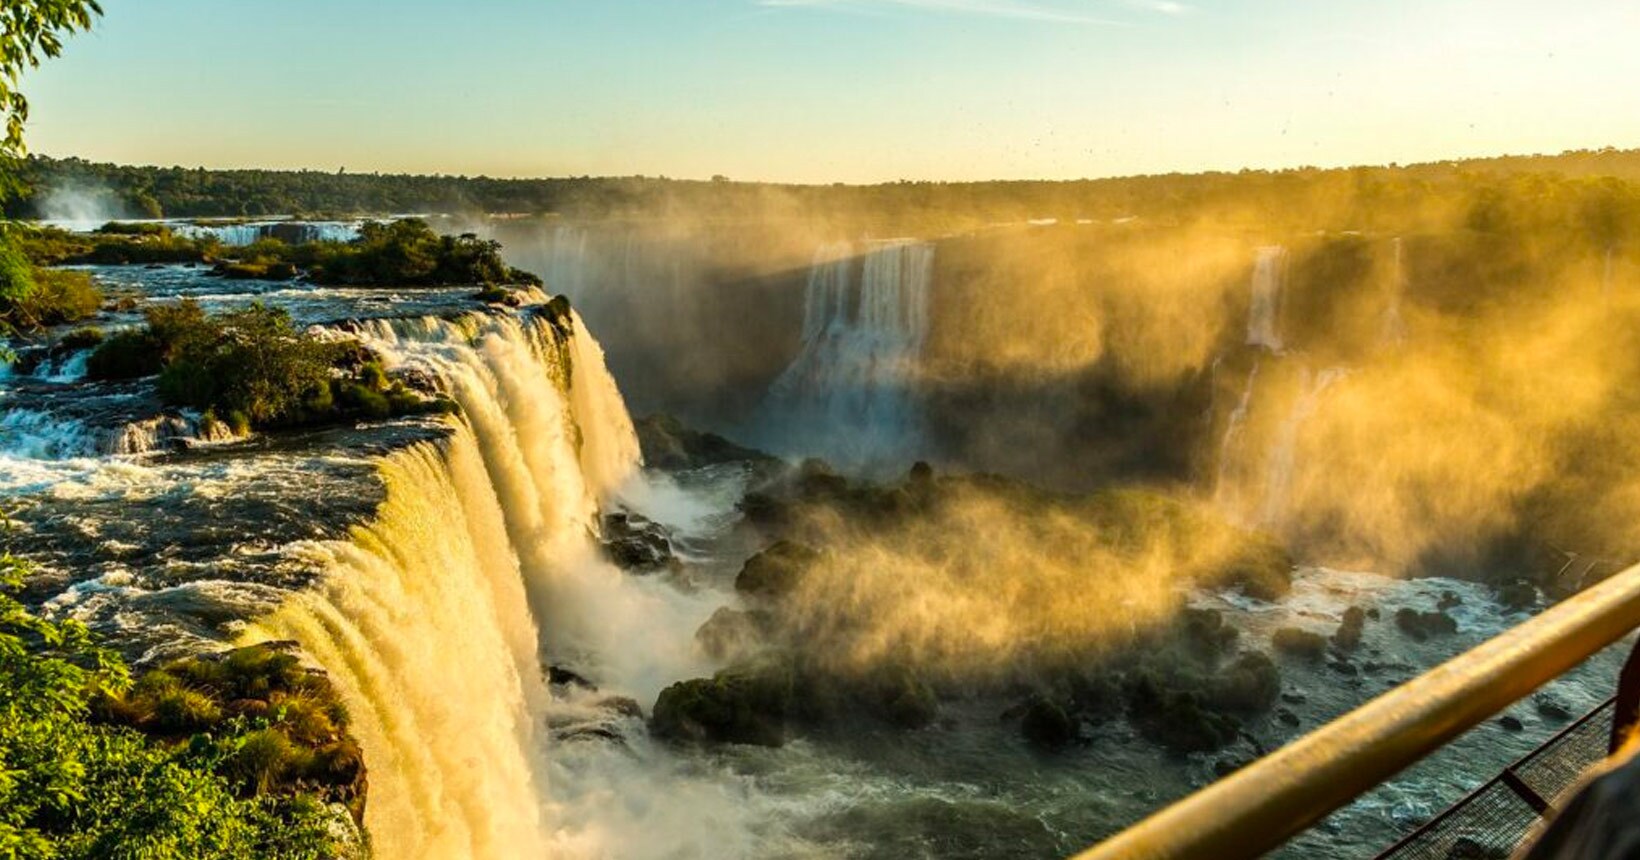 Get up to 40% discount on restaurants and attractions in Foz do Iguaçu!